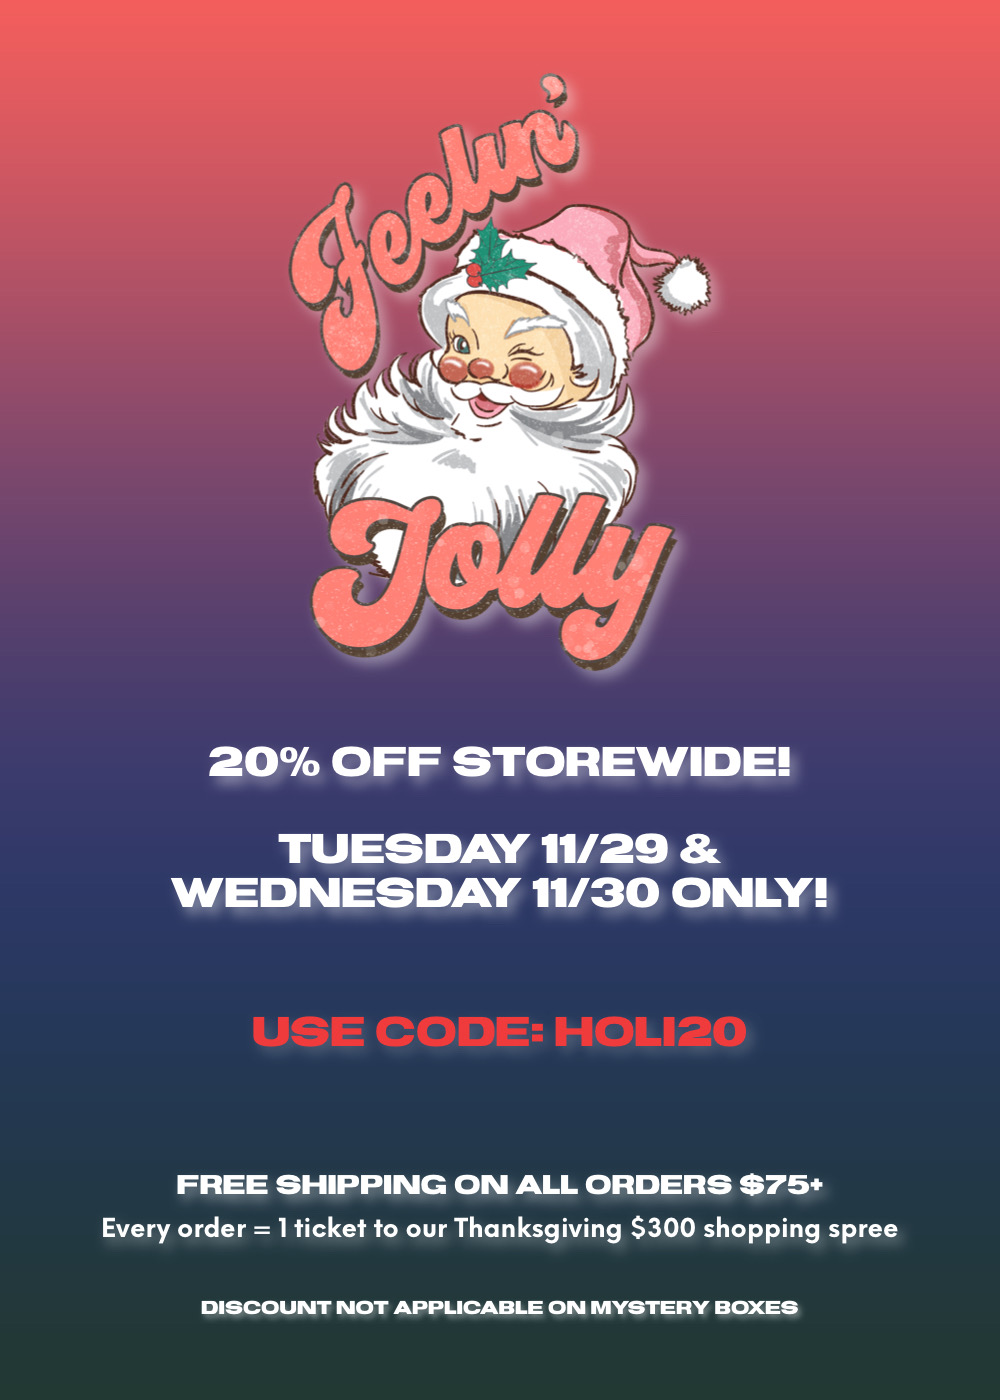  20% OFF STOREWIDE! TUESDAY 1129 WEDNESDAY 1130 ONLY! FREE SHIPPING ON ALL ORDERS $75 Every order 1ticket to our Thanksgiving $300 shopping spree DISCOUNT NOT APPLICABLE ON MYSTERY BOXES 